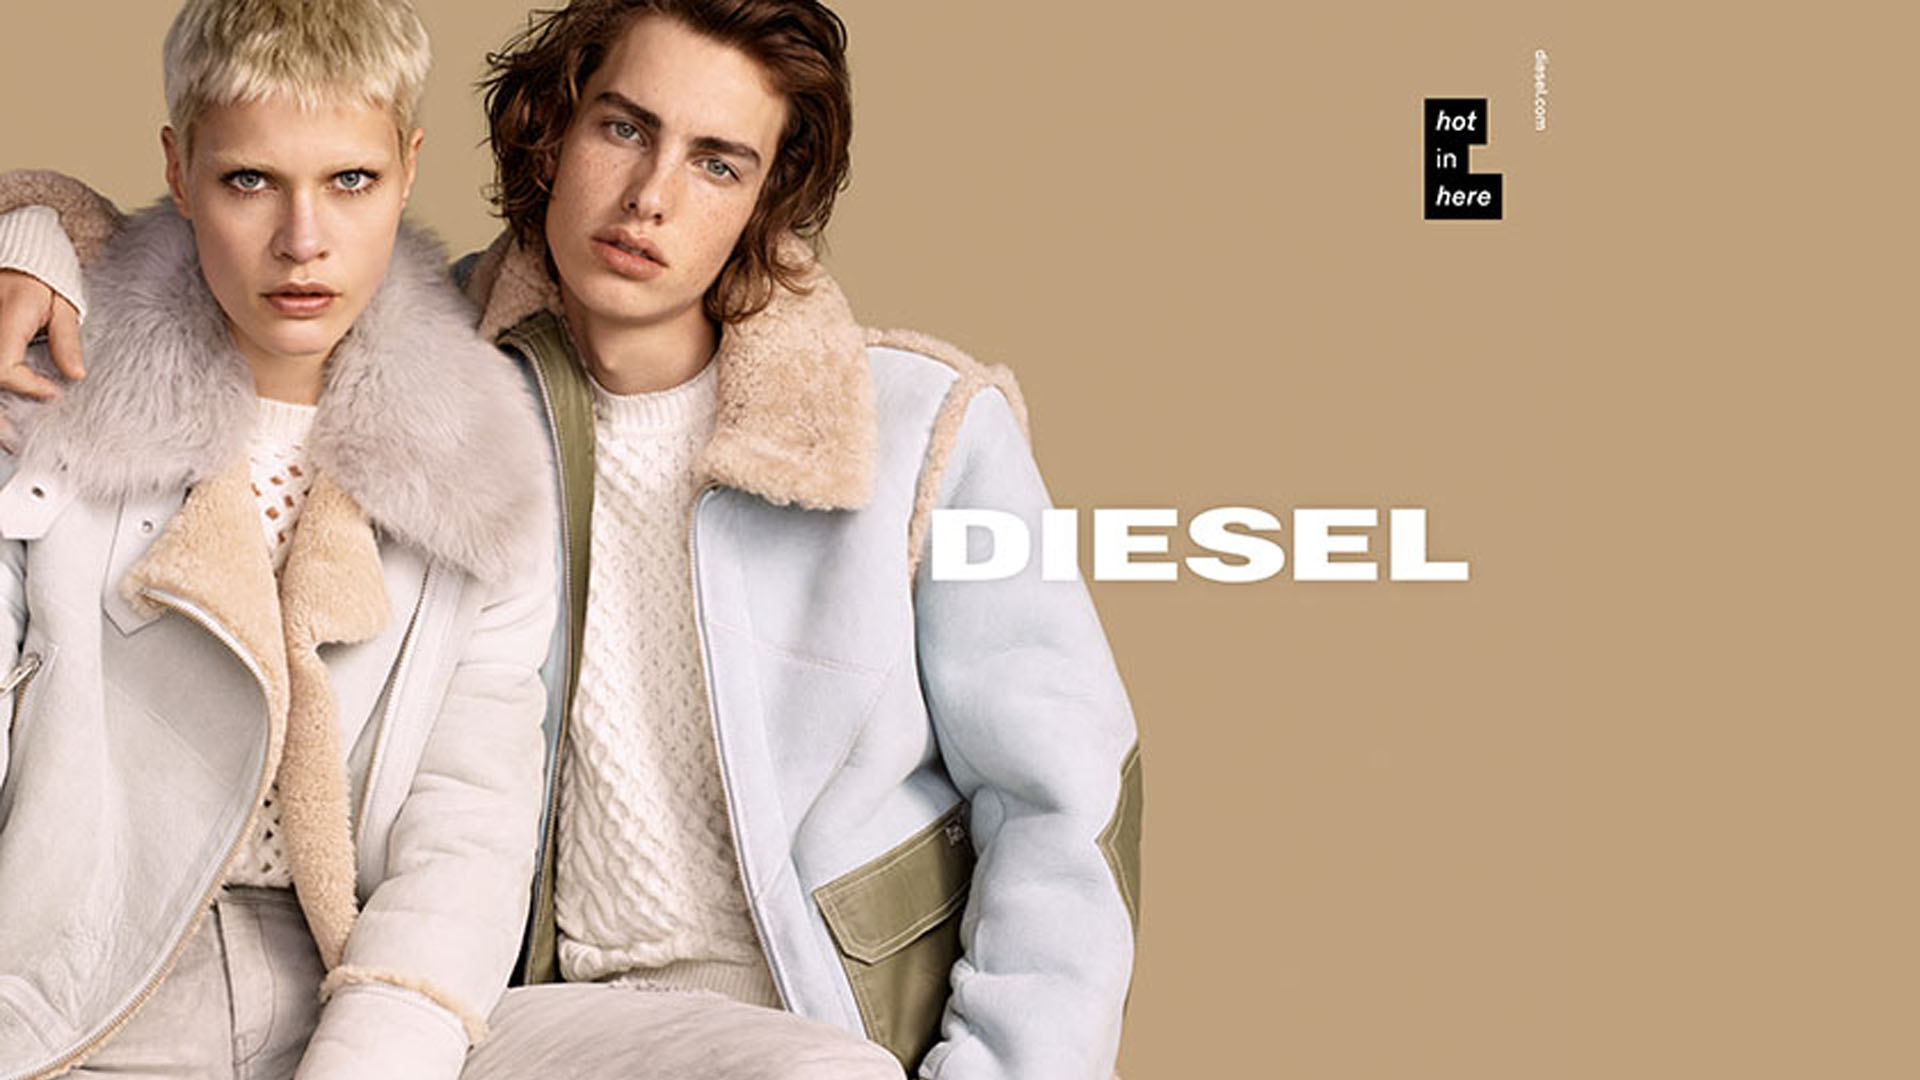 DIESEL FEATURED DIVERSE MODELS IN LATEST FW 2016 CAMPAIGN